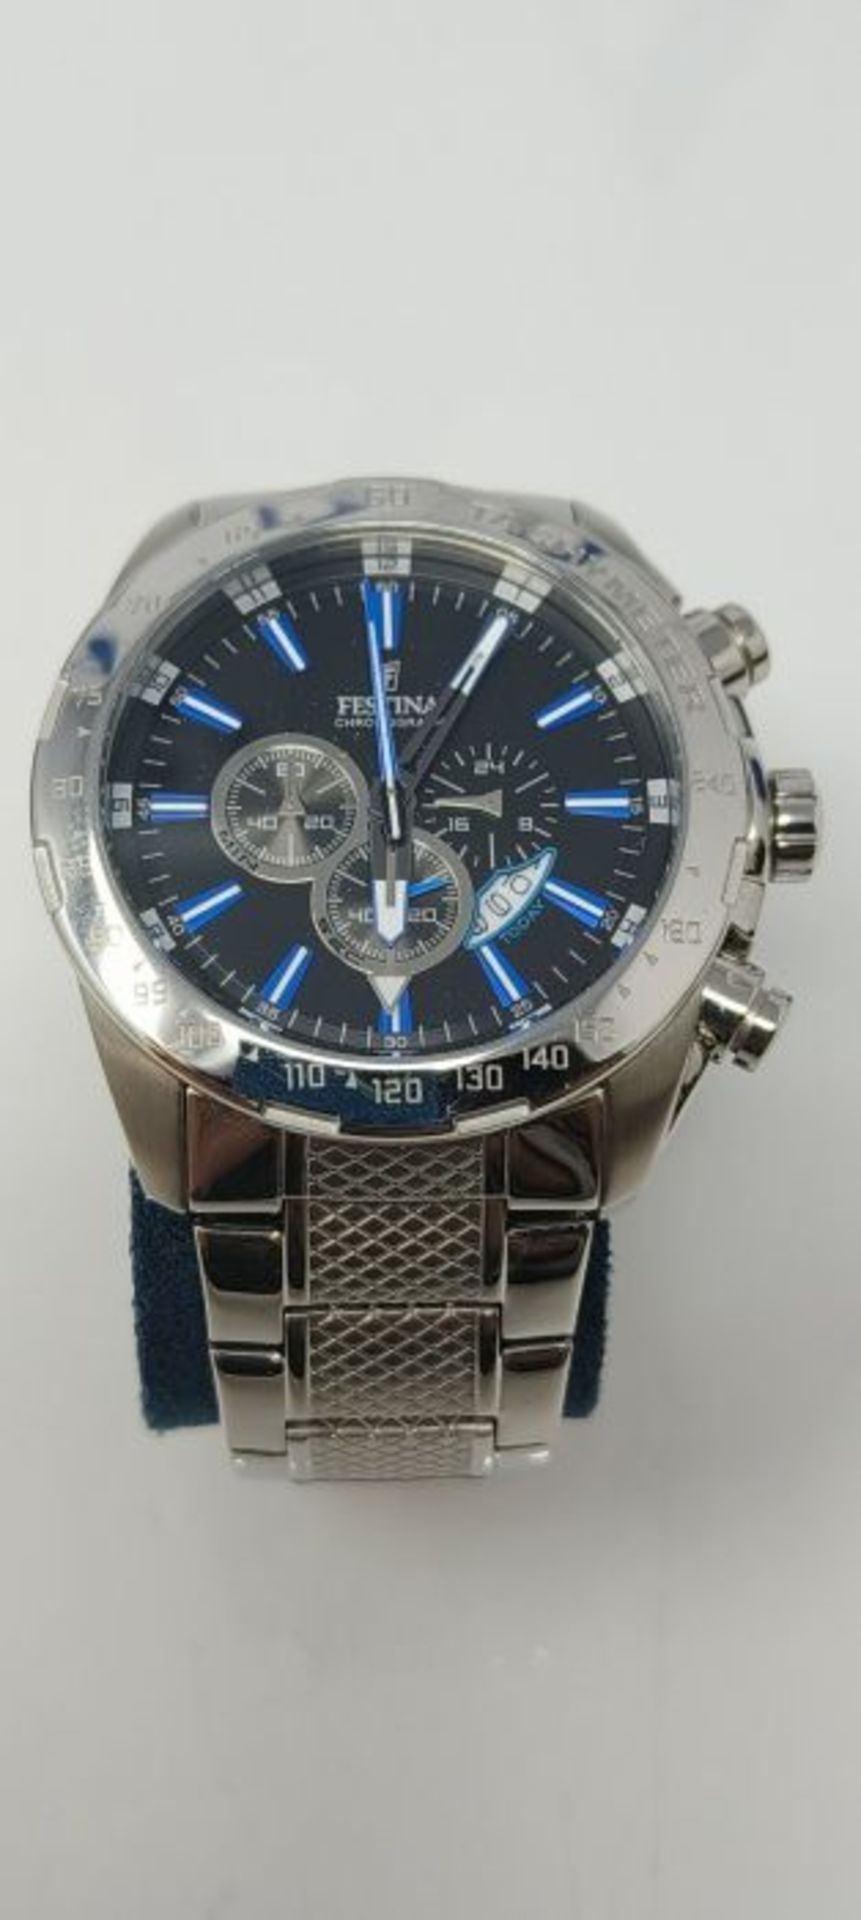 RRP £144.00 Festina Men's Chrono Watch F16488/3 With Steel Strap - Image 3 of 3